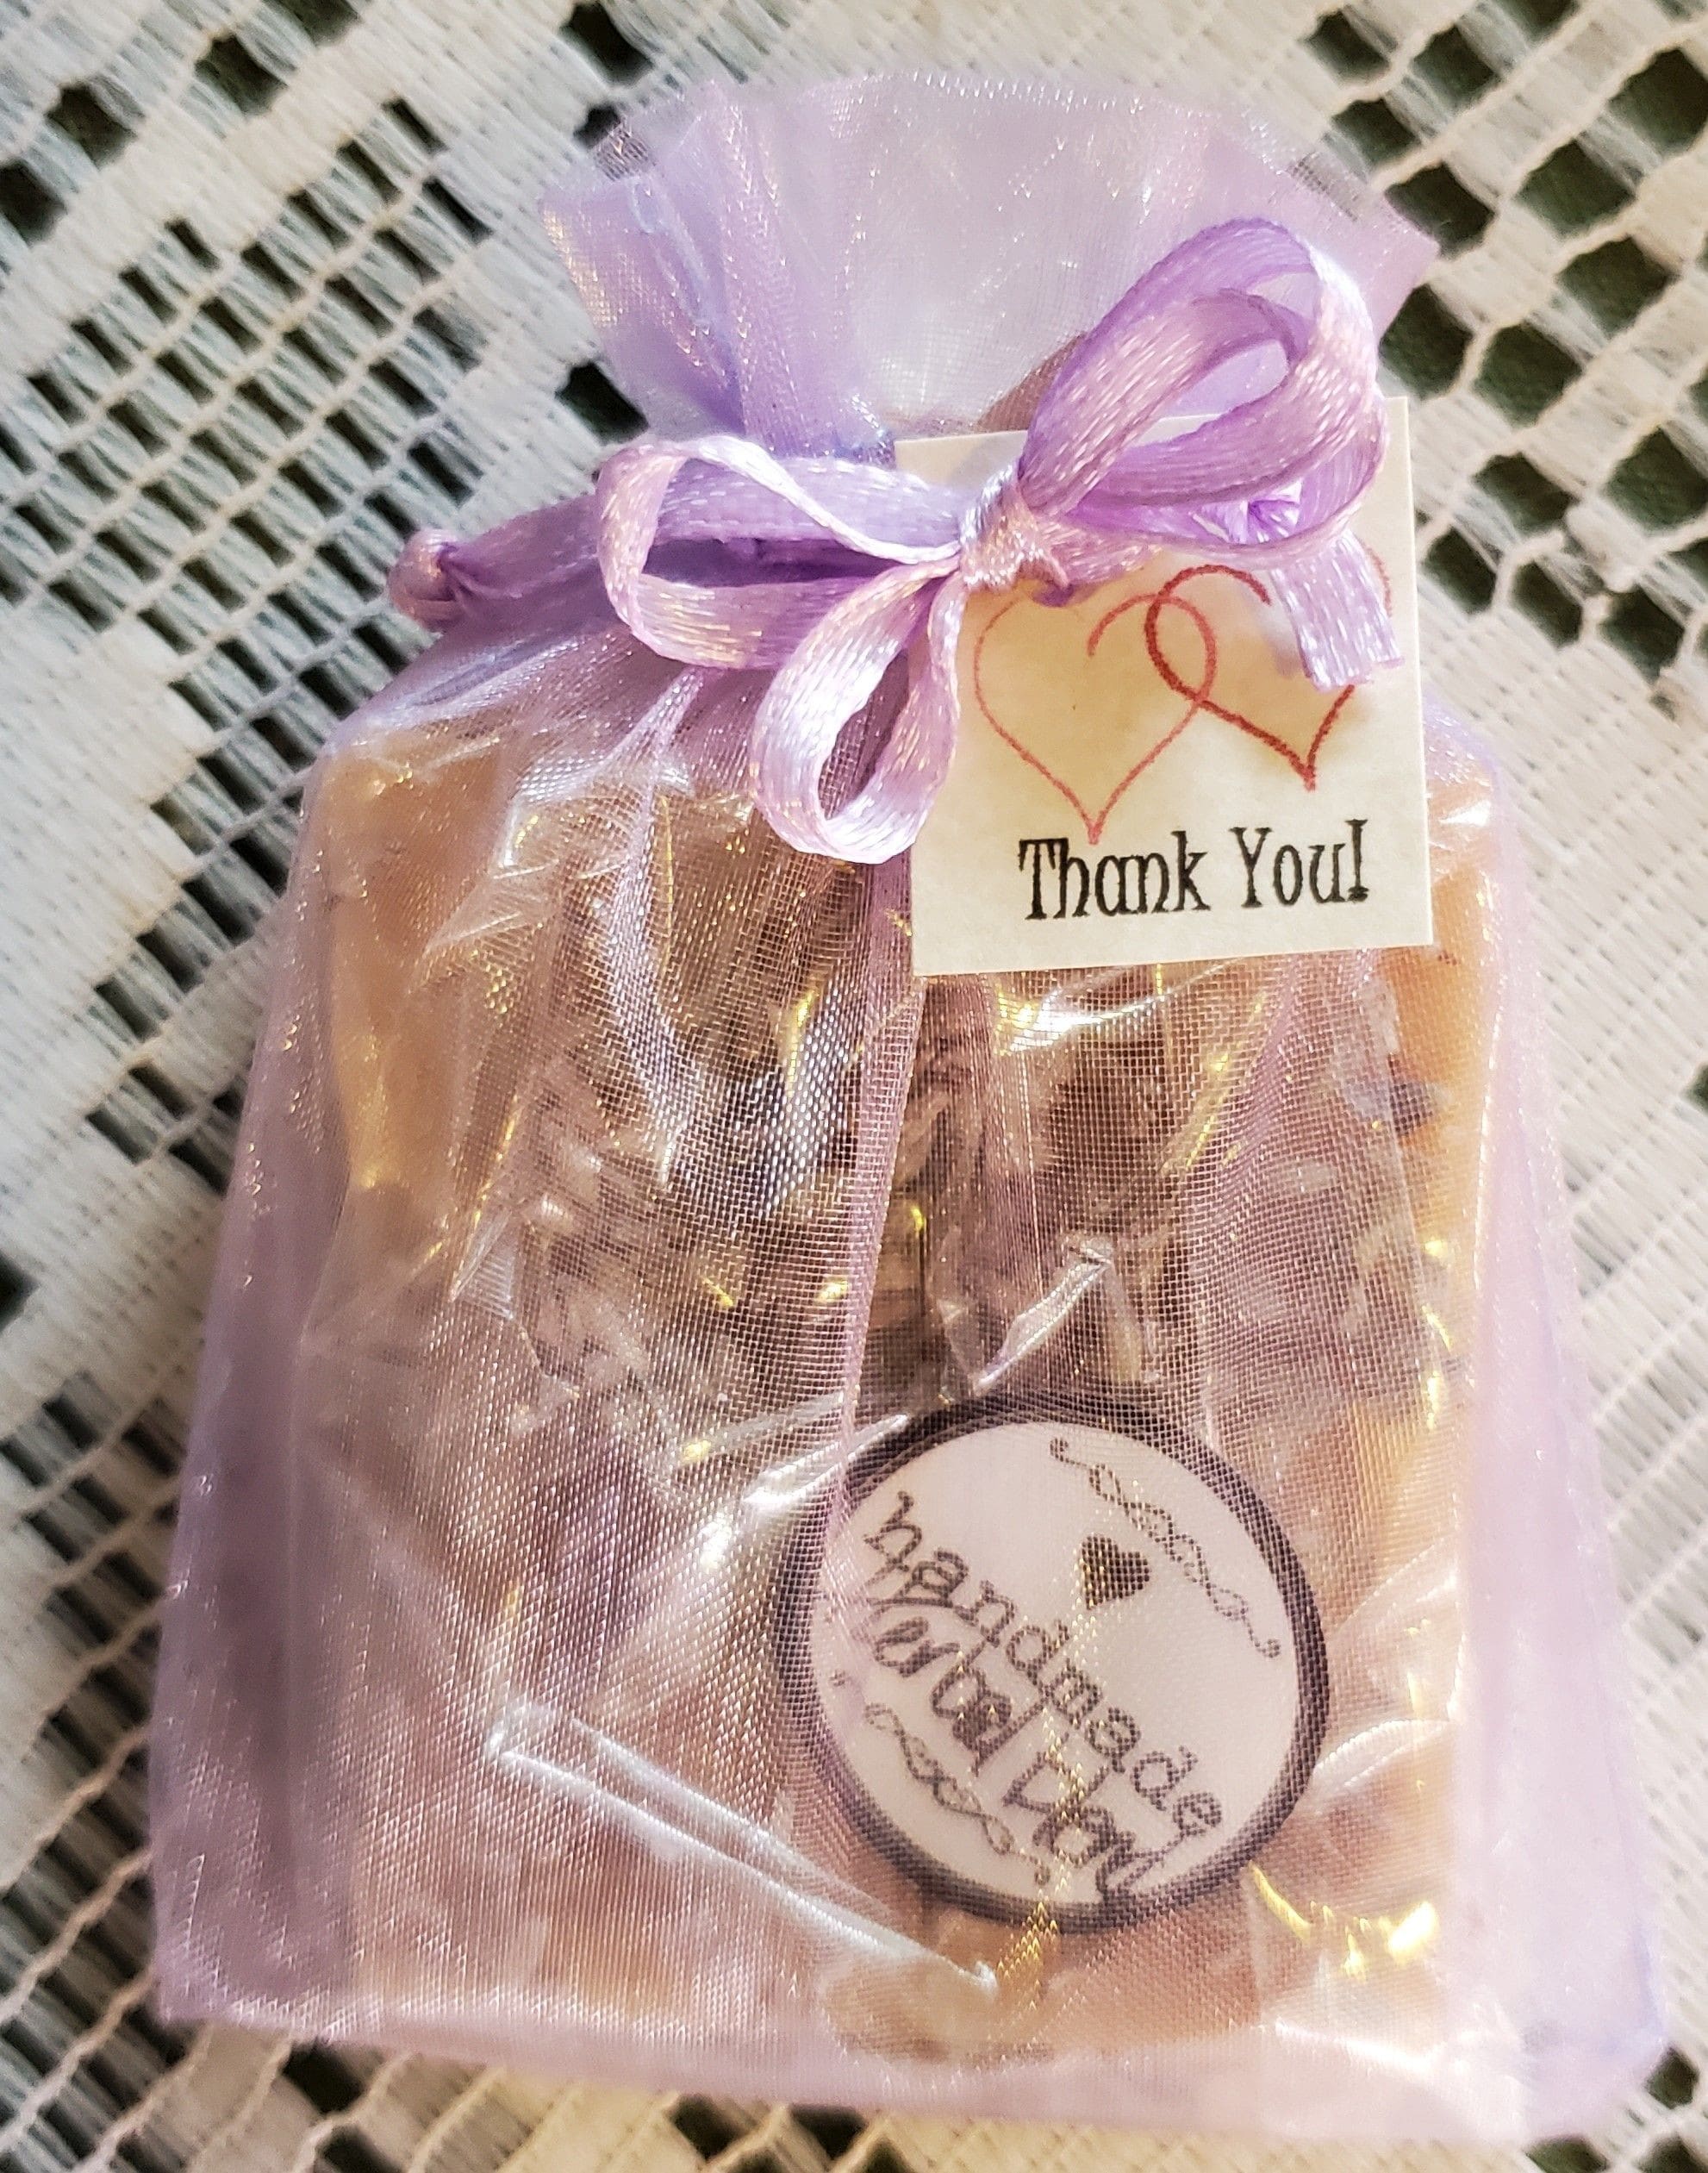 Our quality soap favours make perfect little elegant gifts that you will be proud to give! Made in Canada with no chemicals directing a percentage to charity.